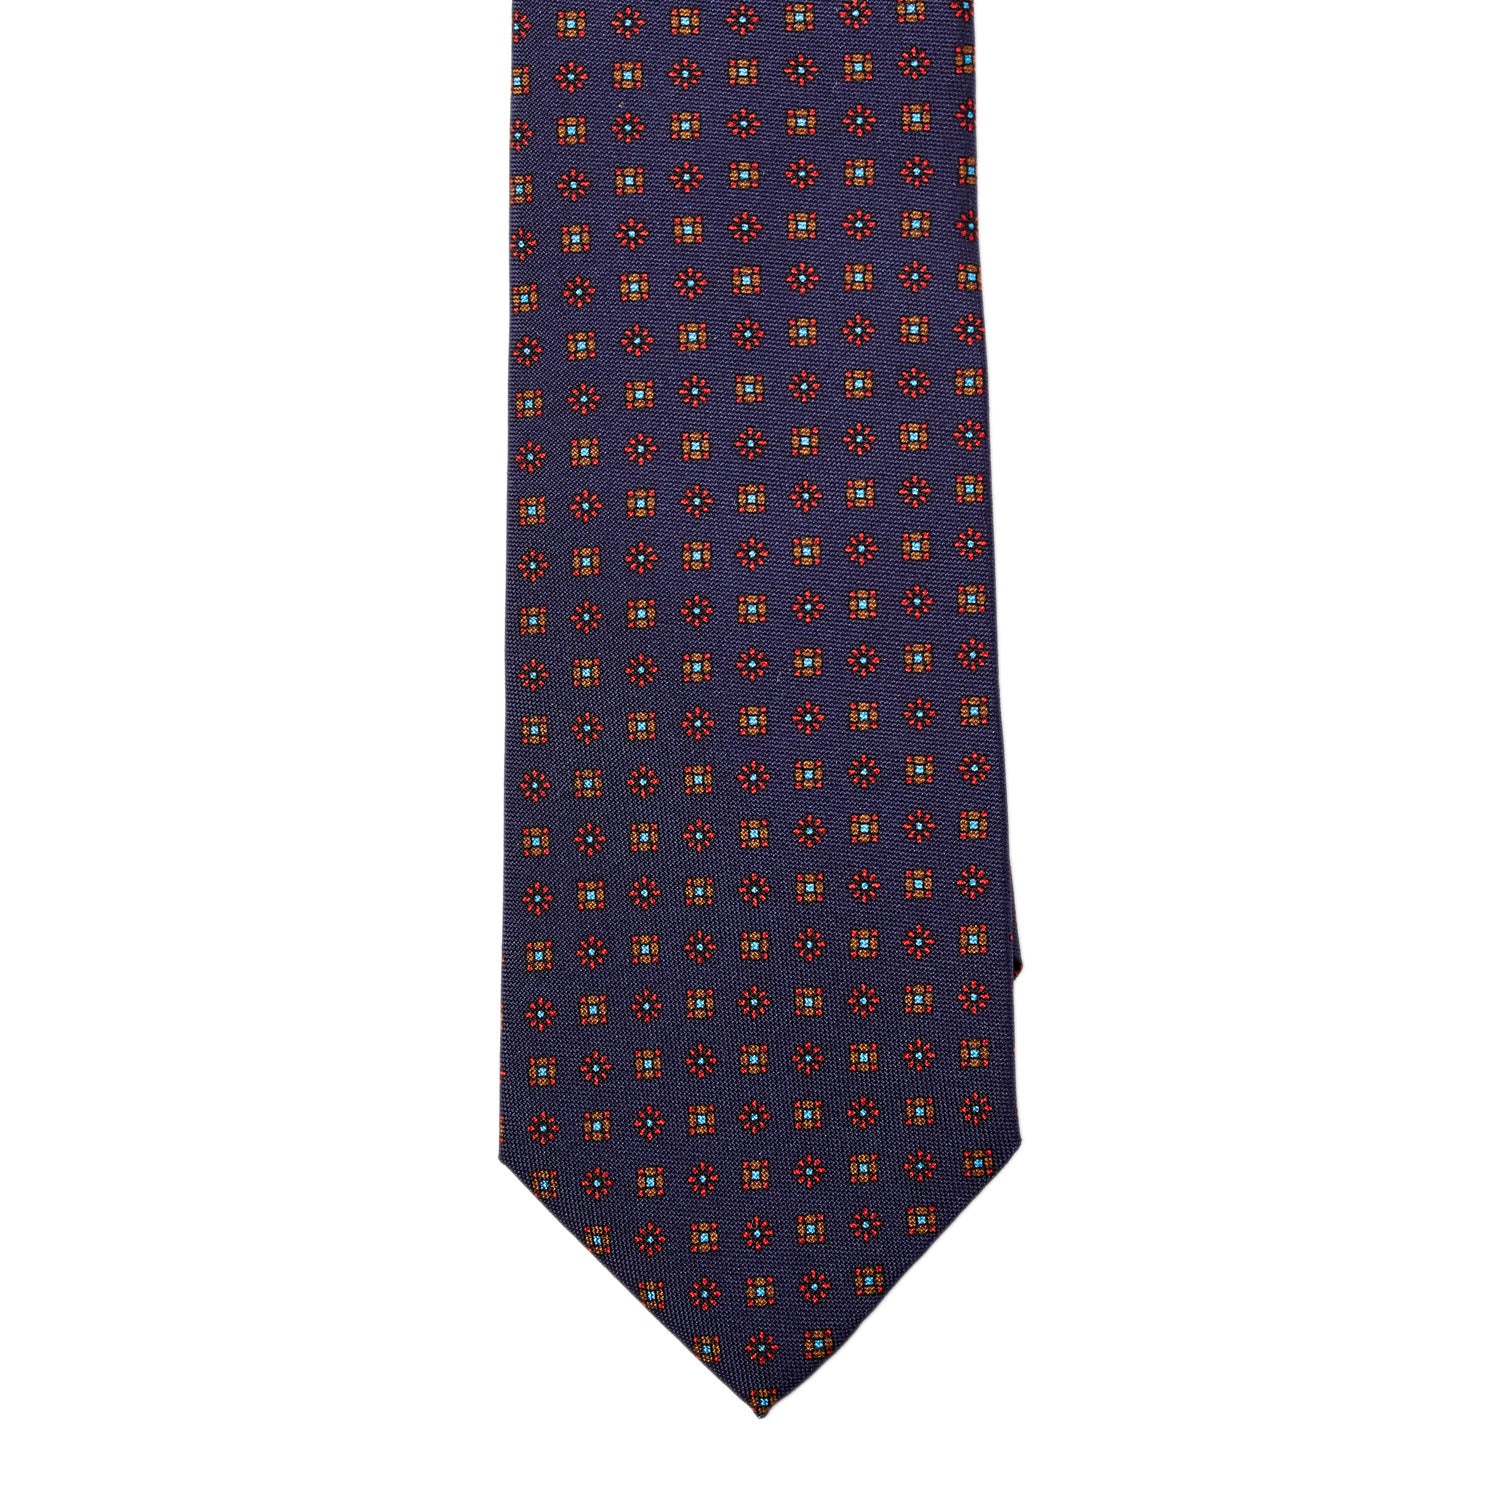 Handmade in the United Kingdom, this KirbyAllison.com Sovereign Grade Navy Floral 25oz Silk Hopsack Tie (150x8.5 cm) showcases quality craftsmanship with a red, orange and blue pattern.